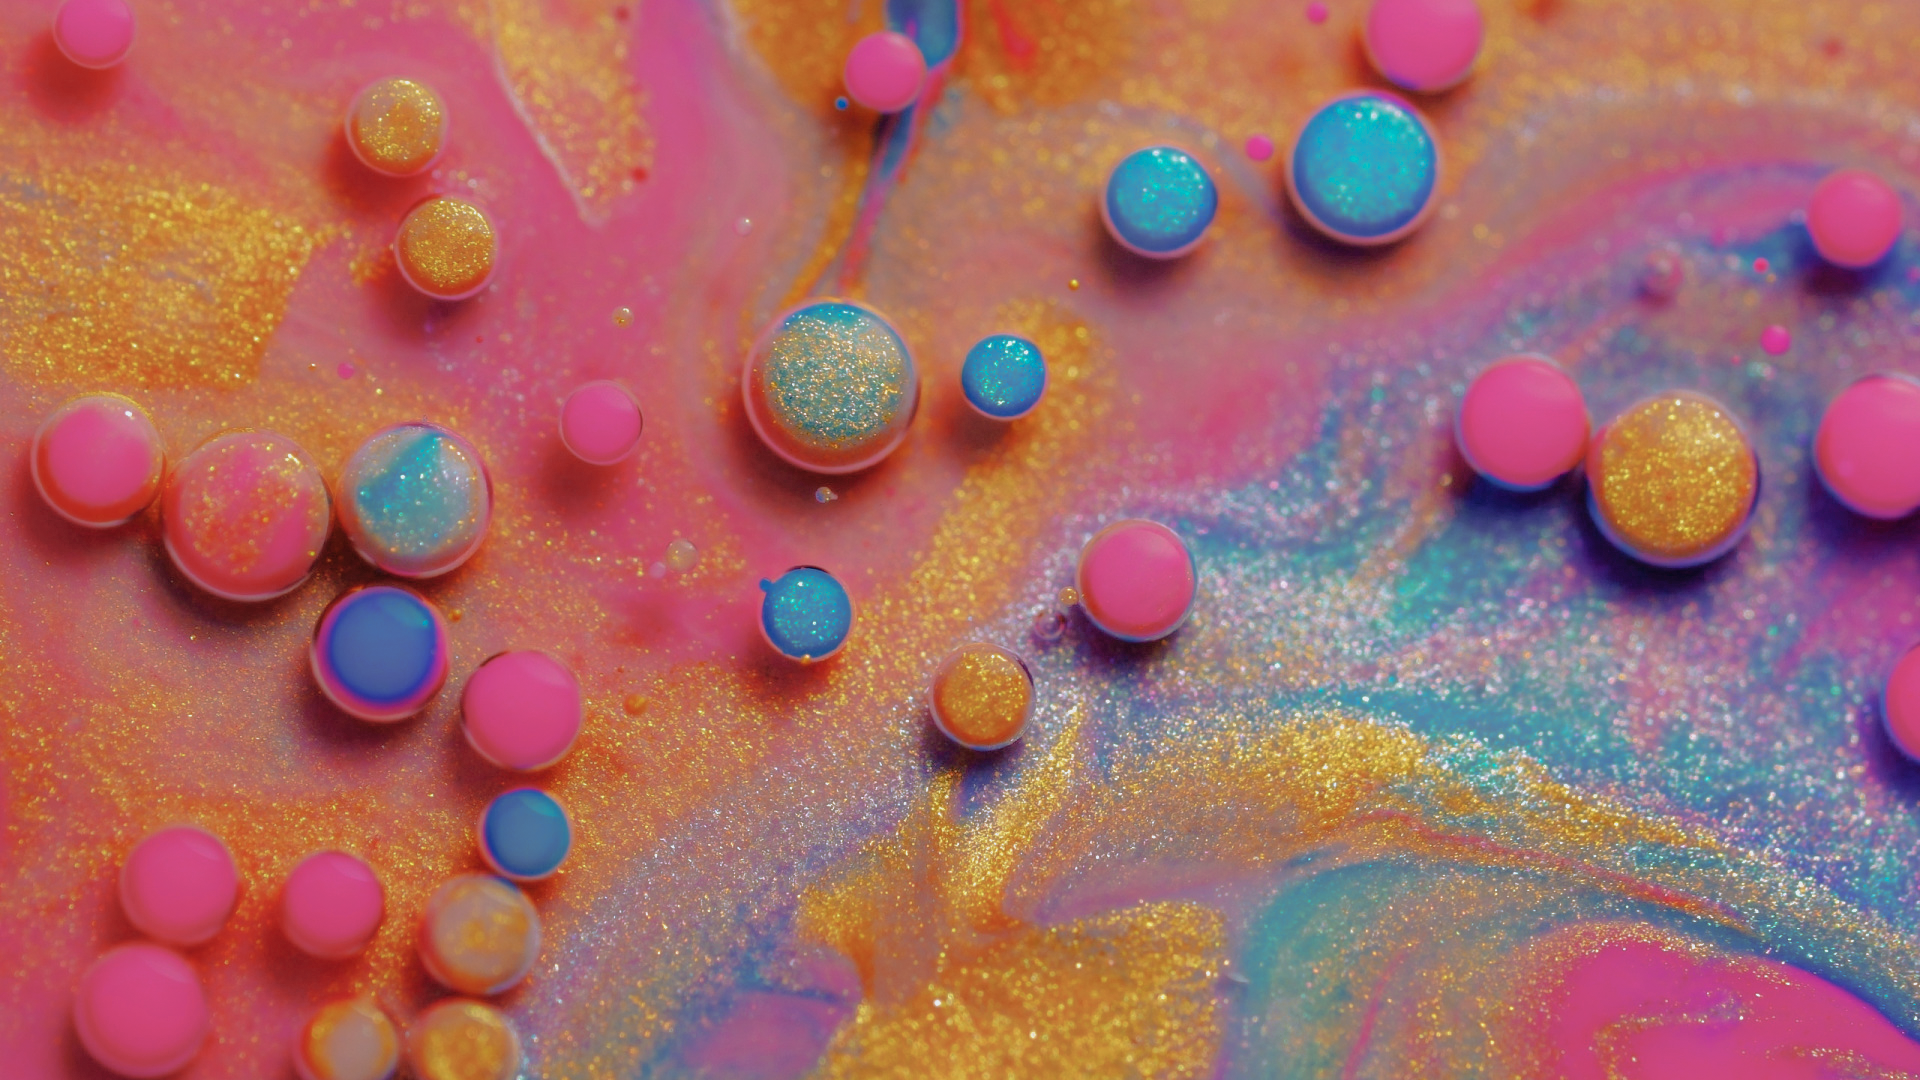 General 1920x1080 ball colorful glitter abstract